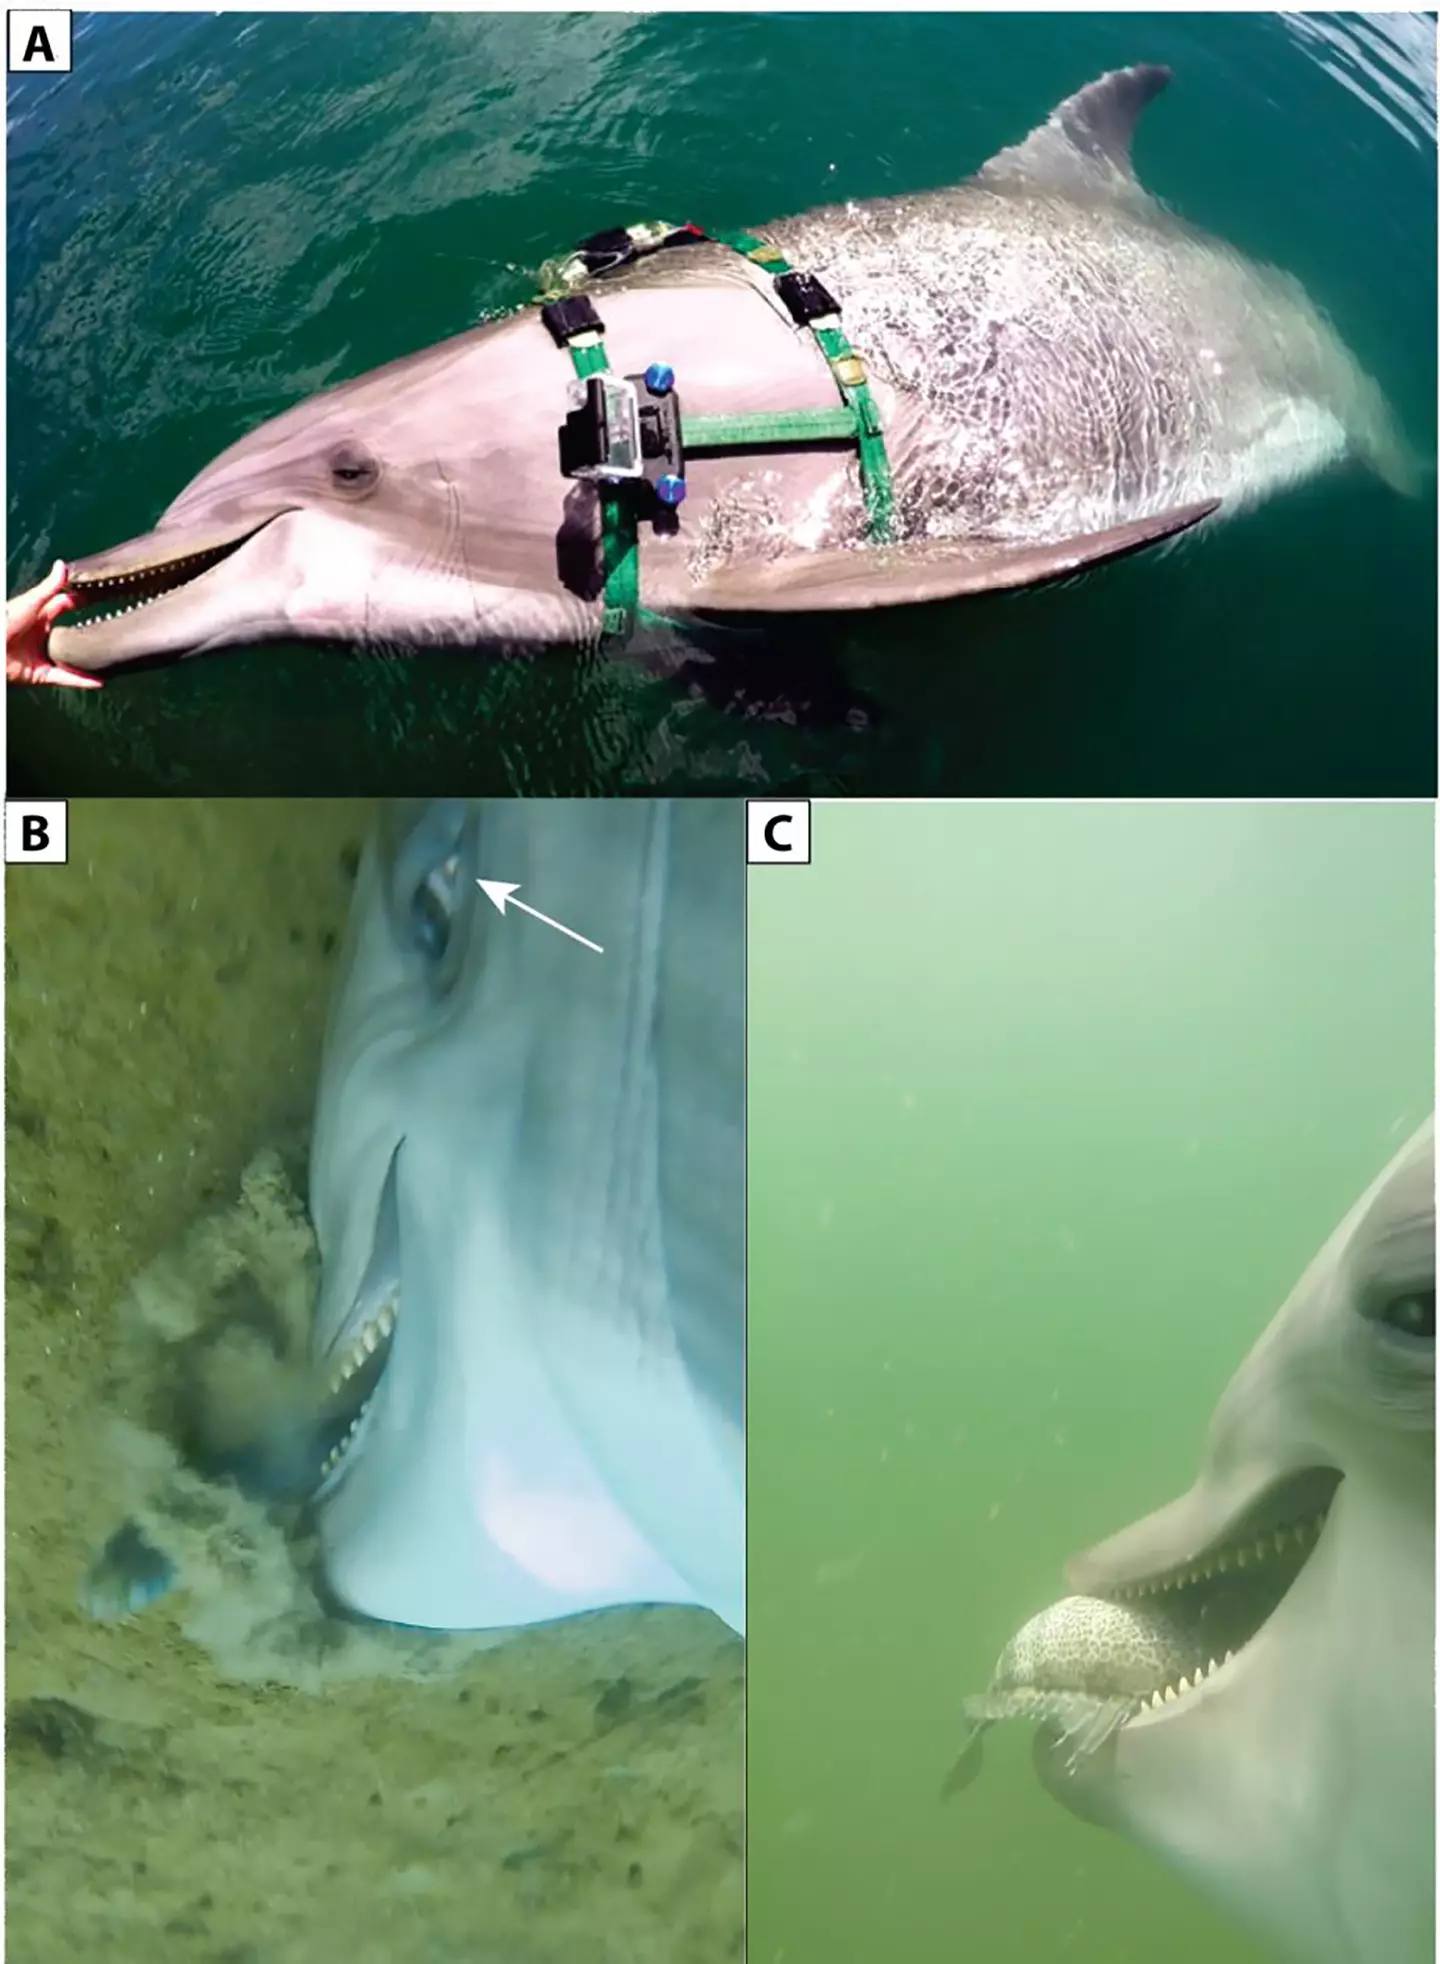 Scientists found dolphins giving the 'side-eye' in some GoPro footage.